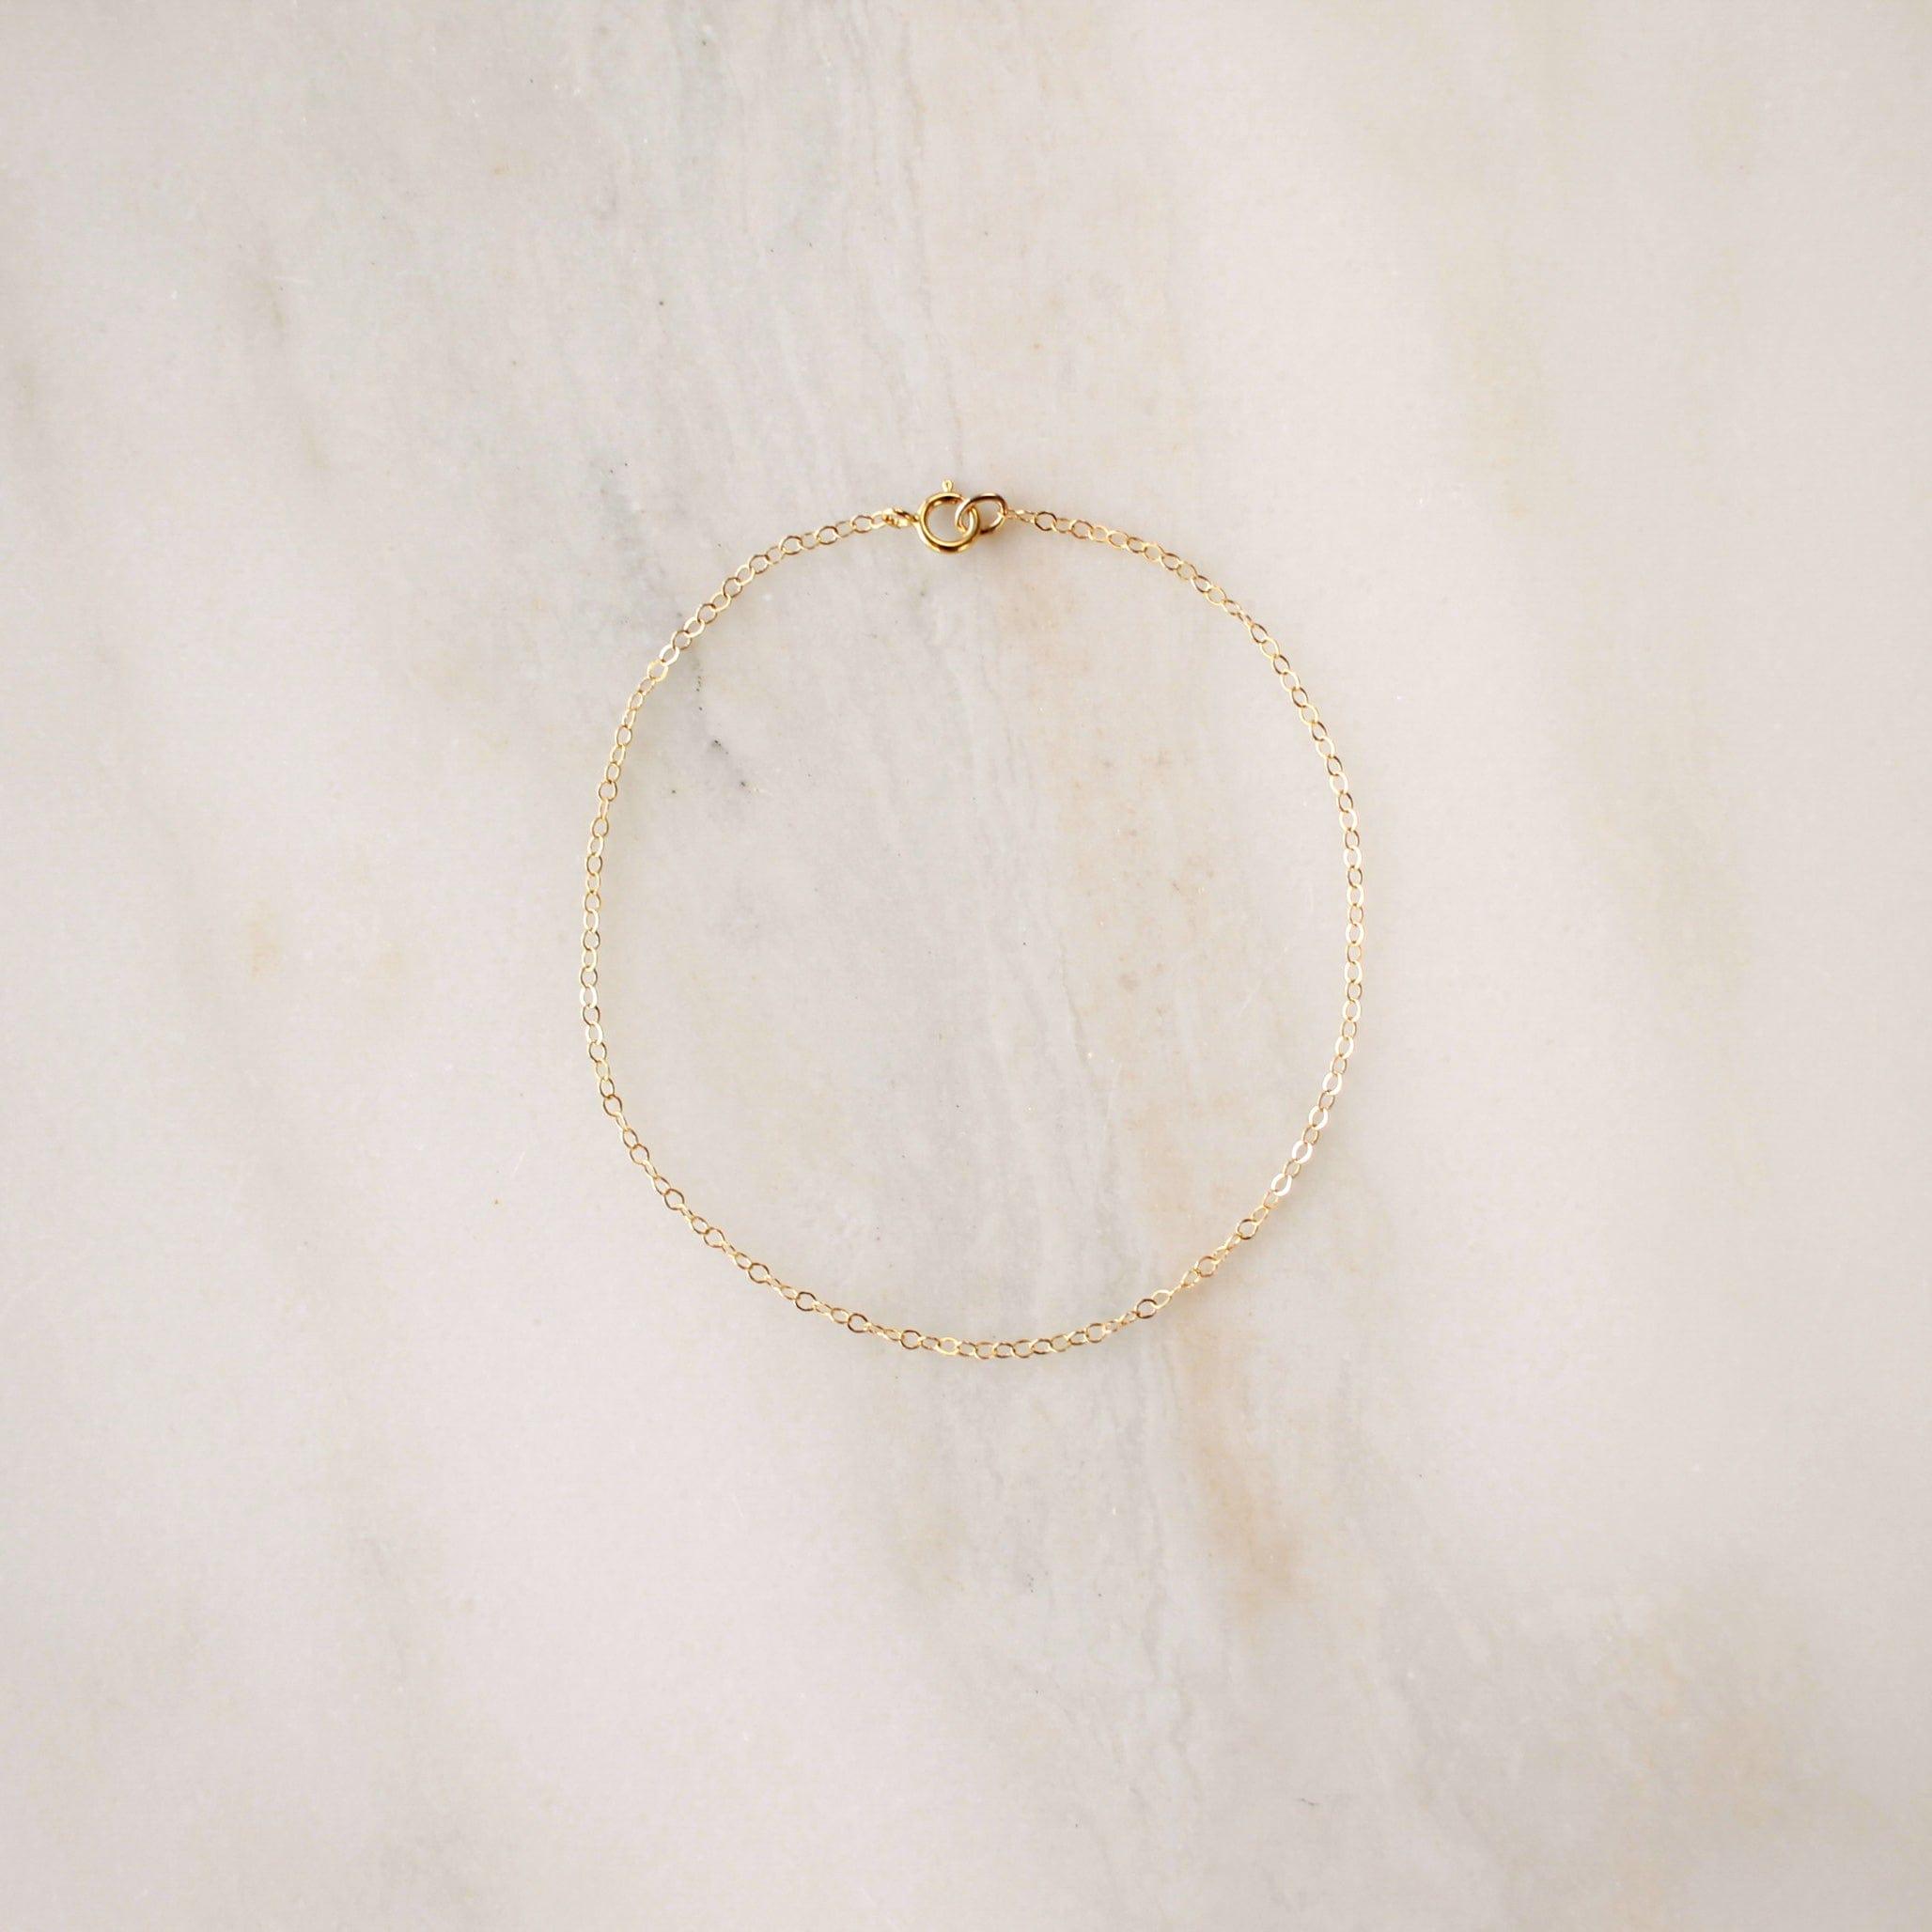 Whisper Chain Bracelet - Nolia Jewelry - Meaningful + Sustainably Handcrafted Jewelry